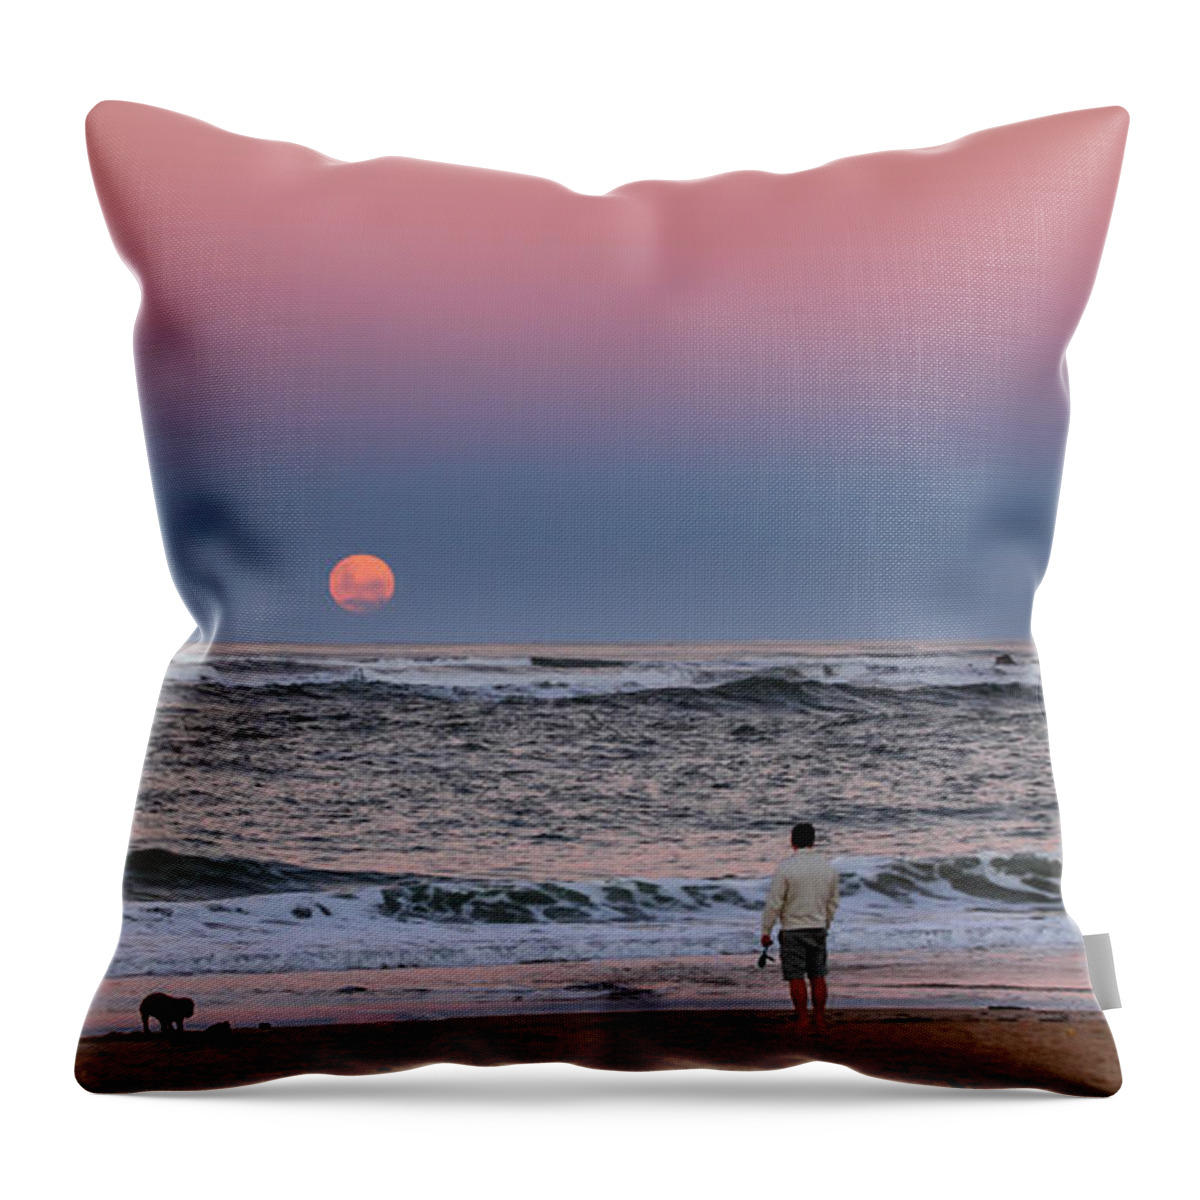 Super Moon Throw Pillow featuring the photograph Supermoonrise by Howard Ferrier